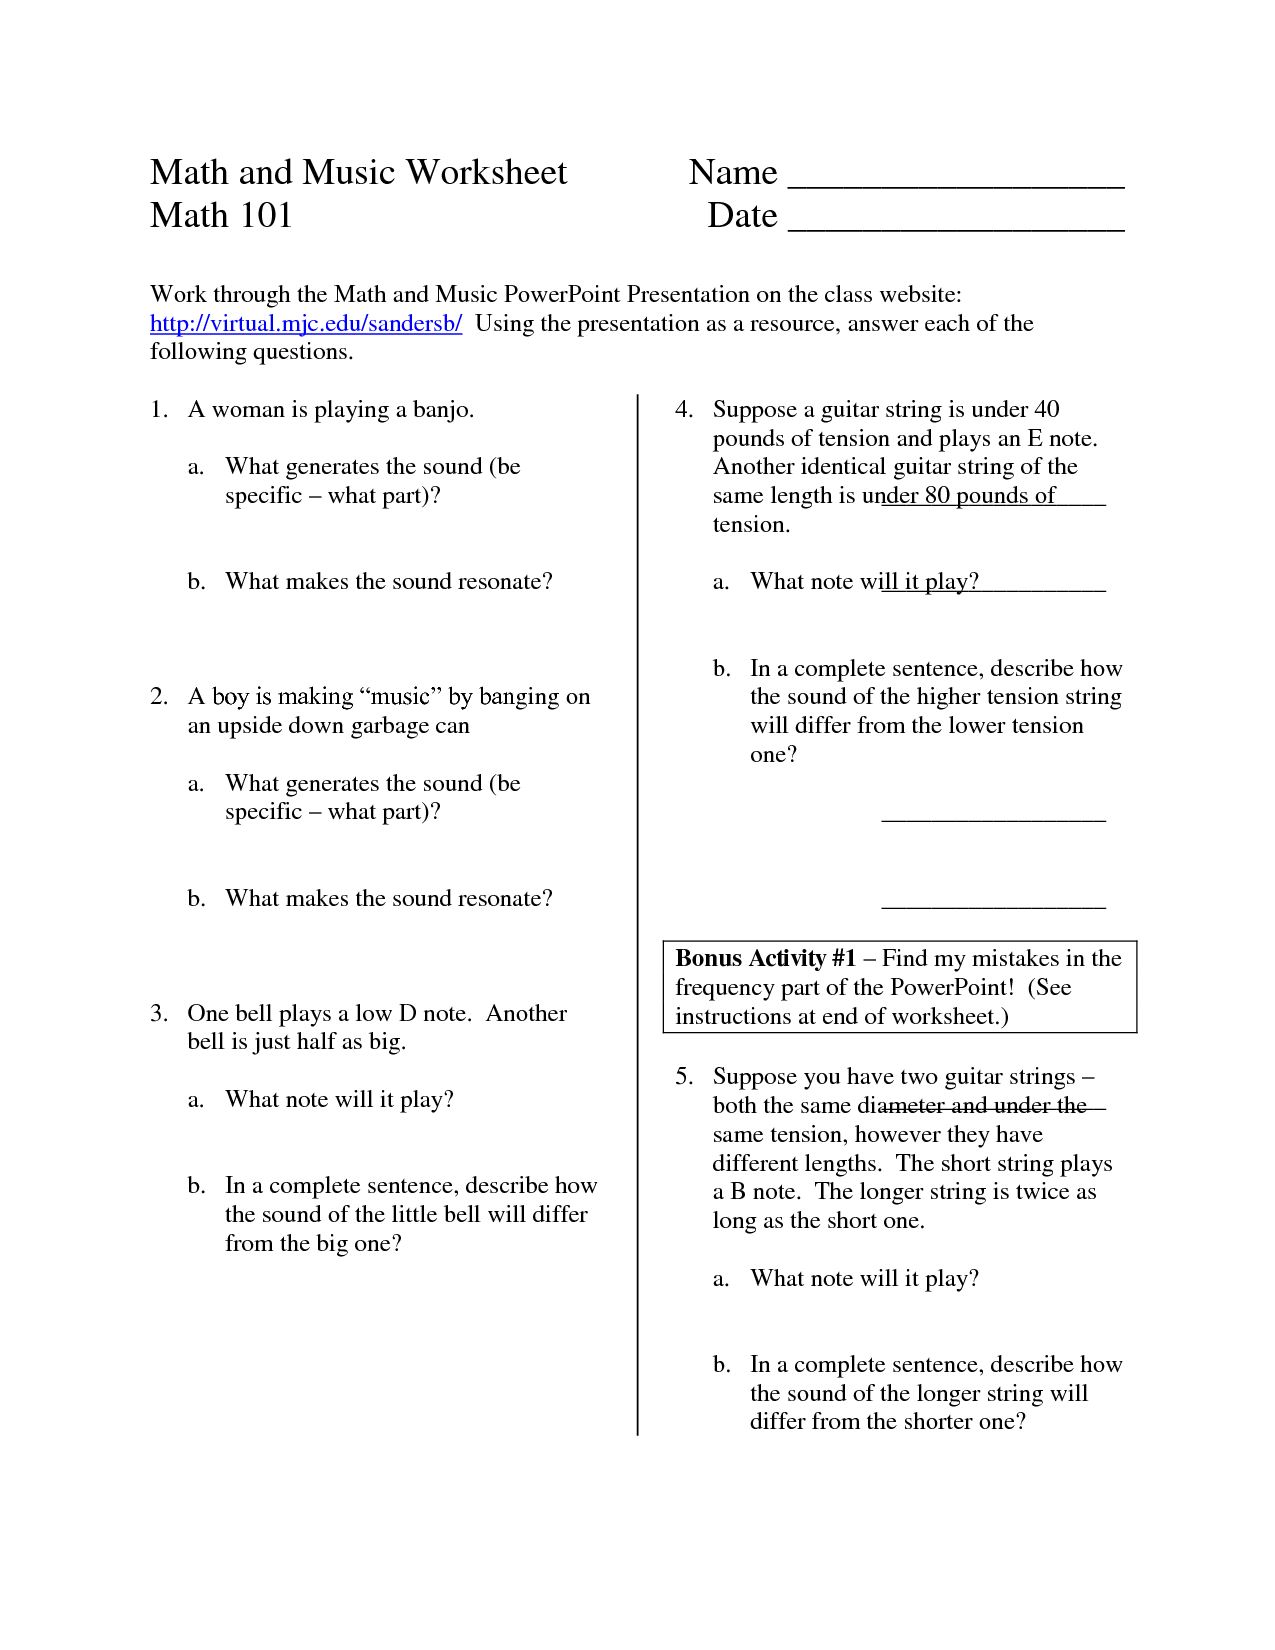 13 Best Images of Step By Step Worksheet - Two-Step Equations Worksheet